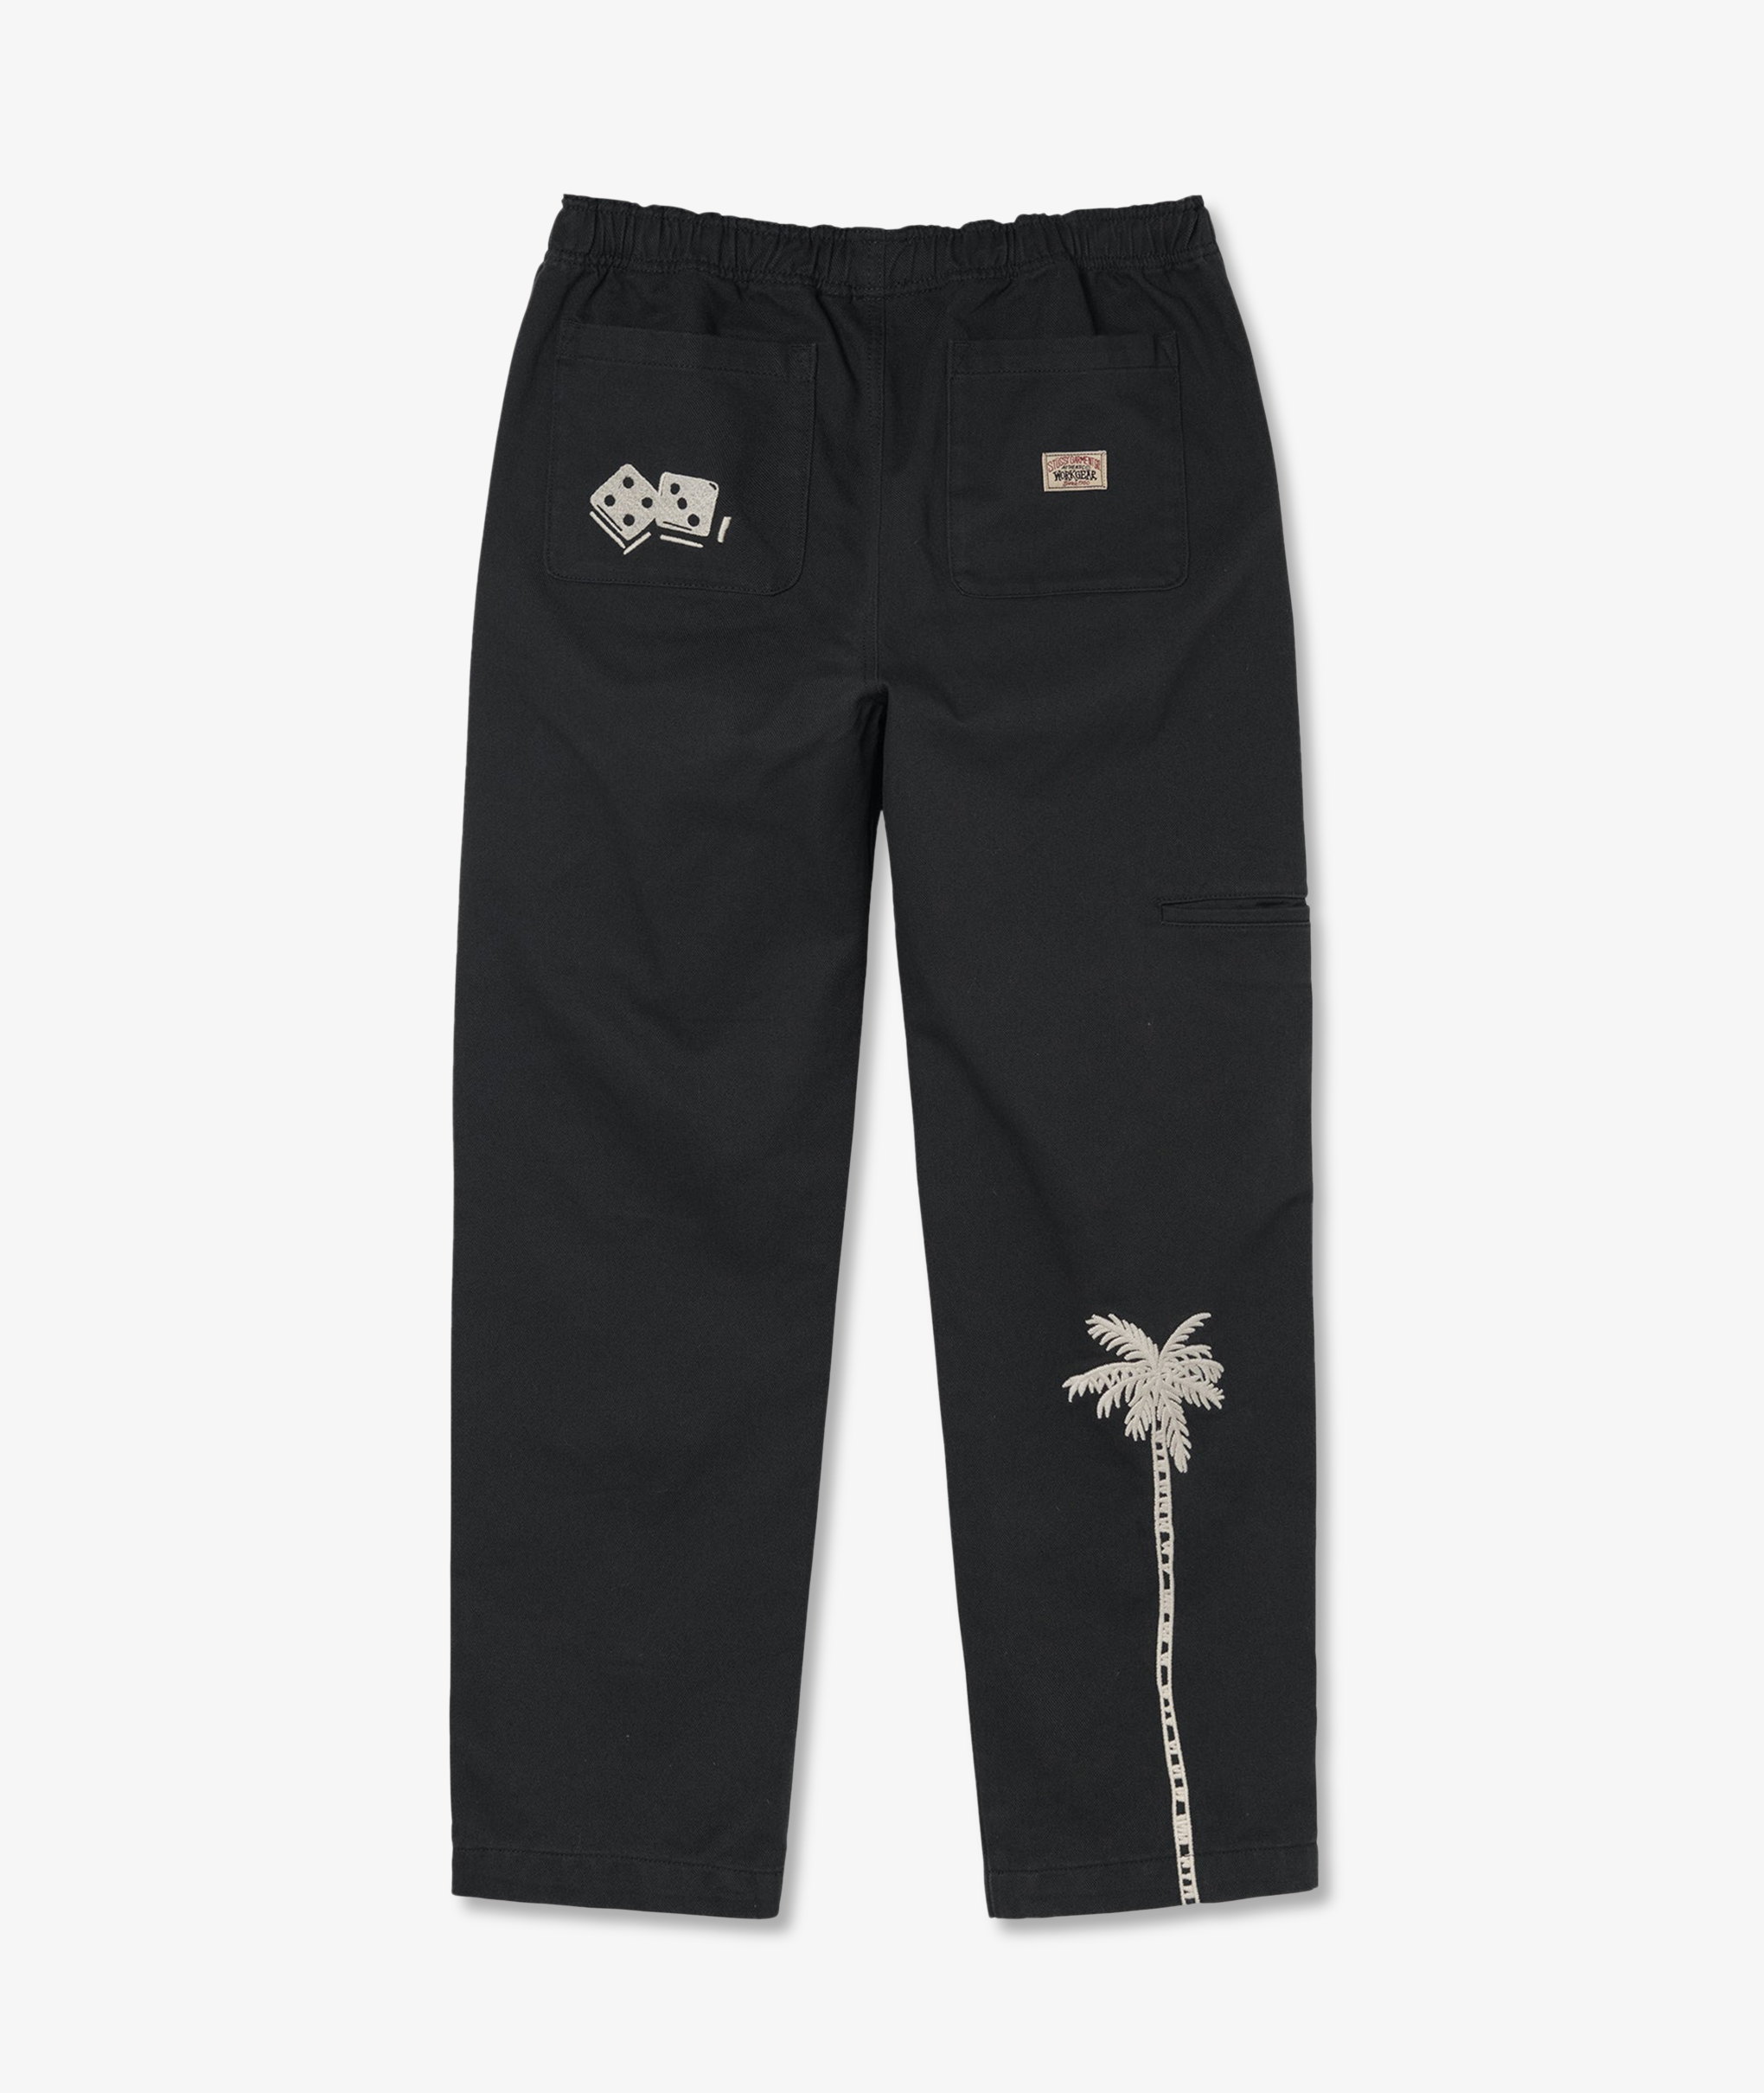 Norse Store | Shipping Worldwide - Stussy Noma Icon Beach